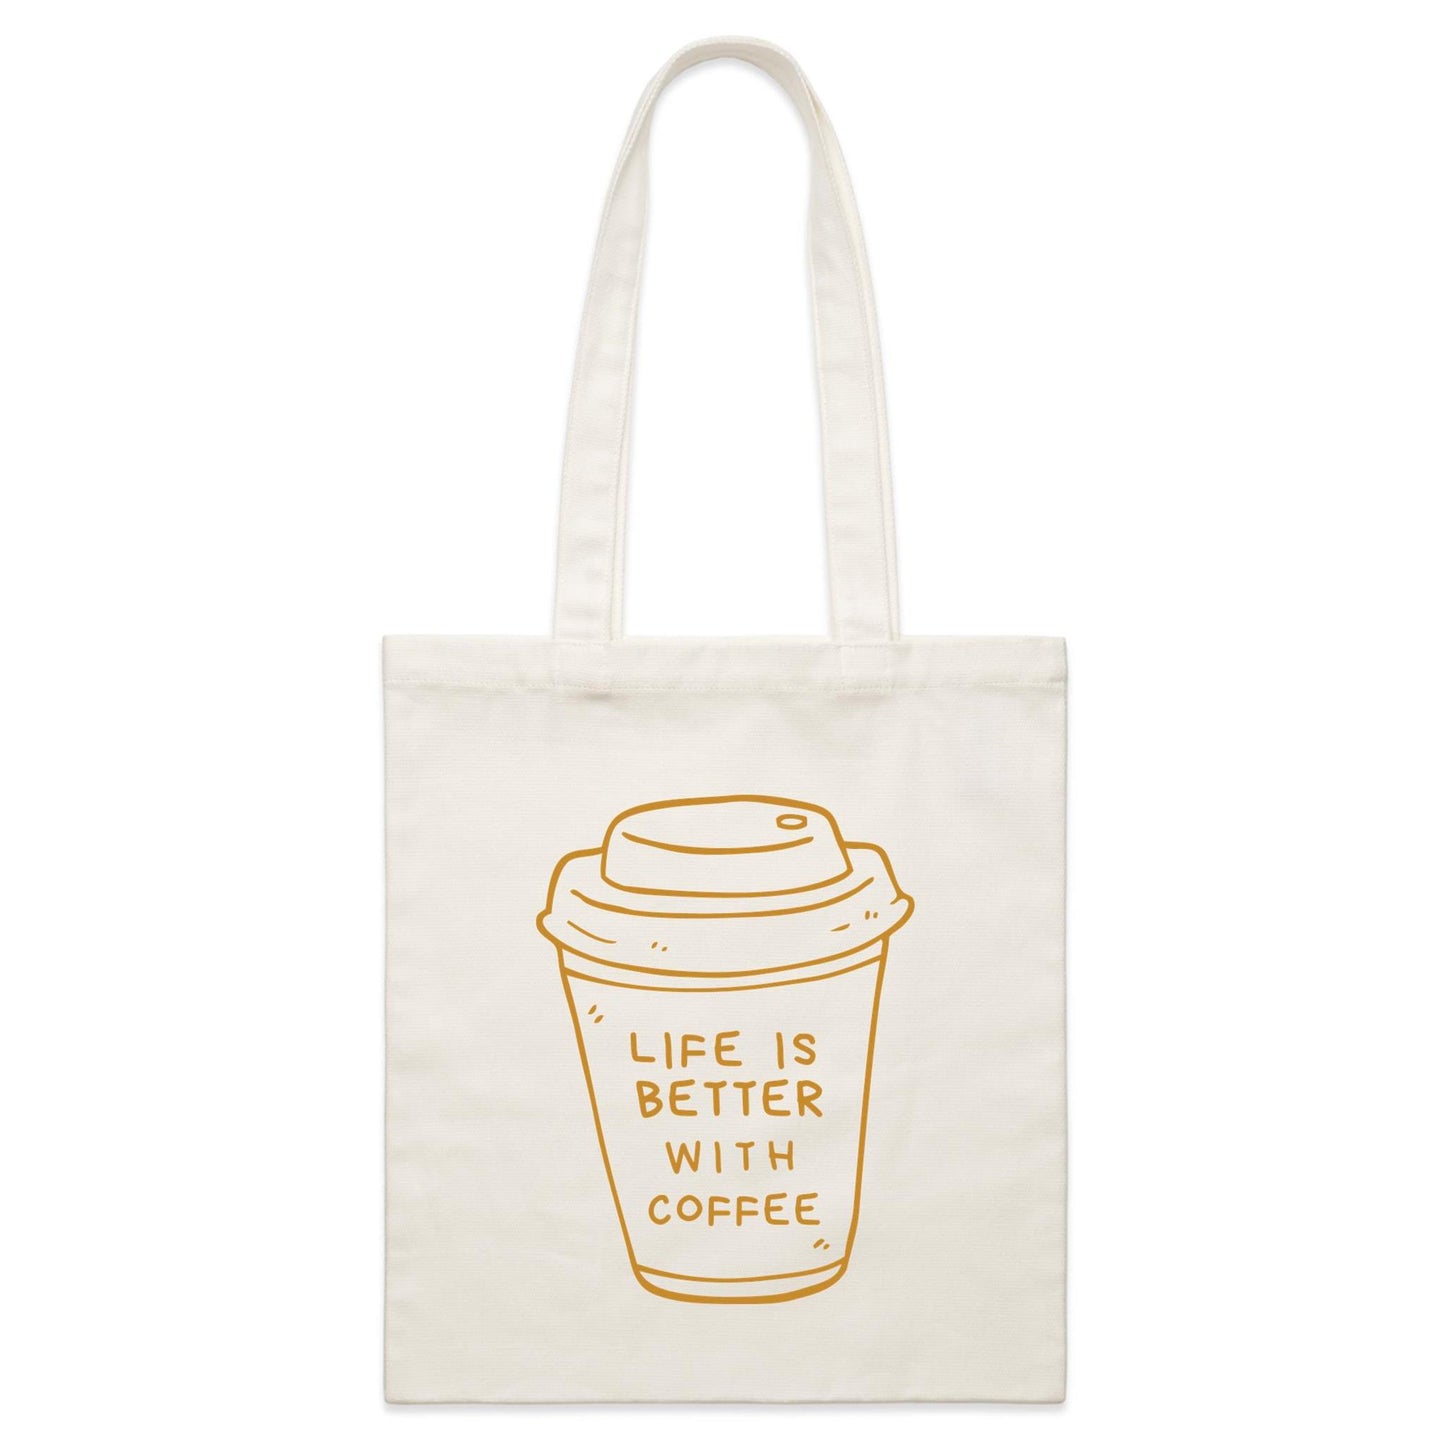 Life Is Better With Coffee - Parcel Canvas Tote Bag Default Title Parcel Tote Bag